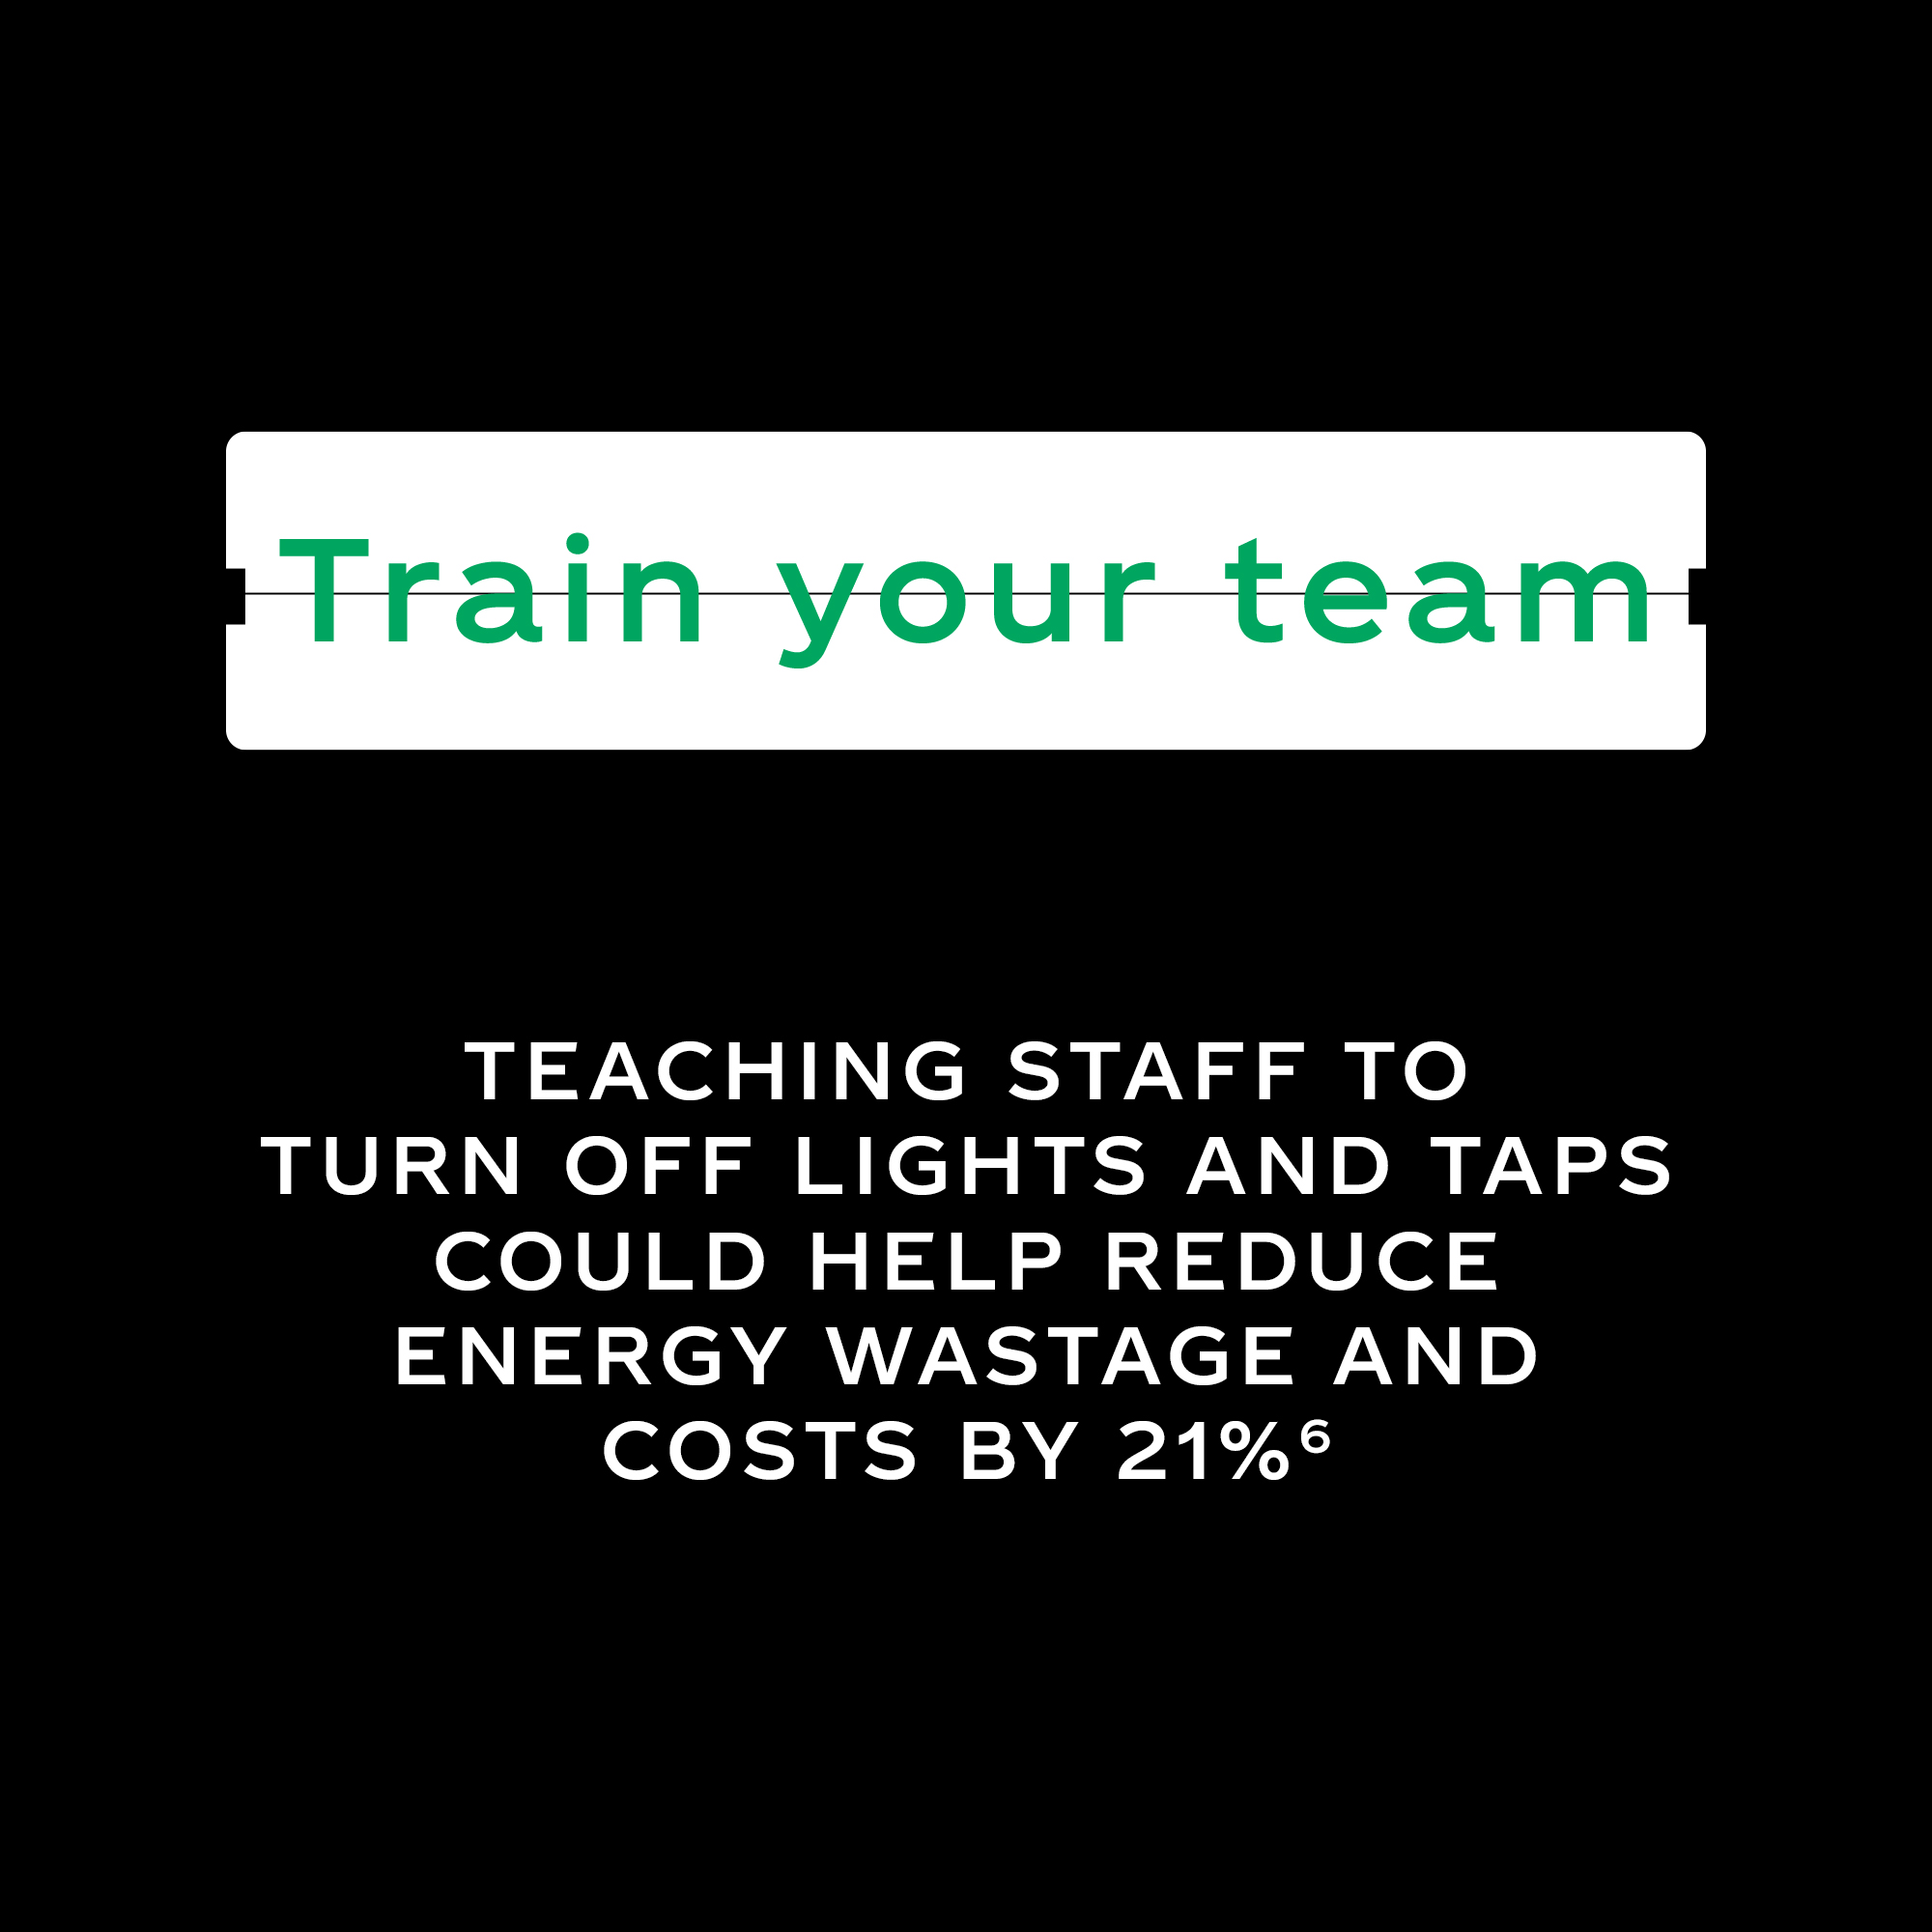 Button like element with the text 'Train your team' and white text saying 'Teaching staff to turn off the lights and taps could help your reduce energy wastage and costs by 21%'